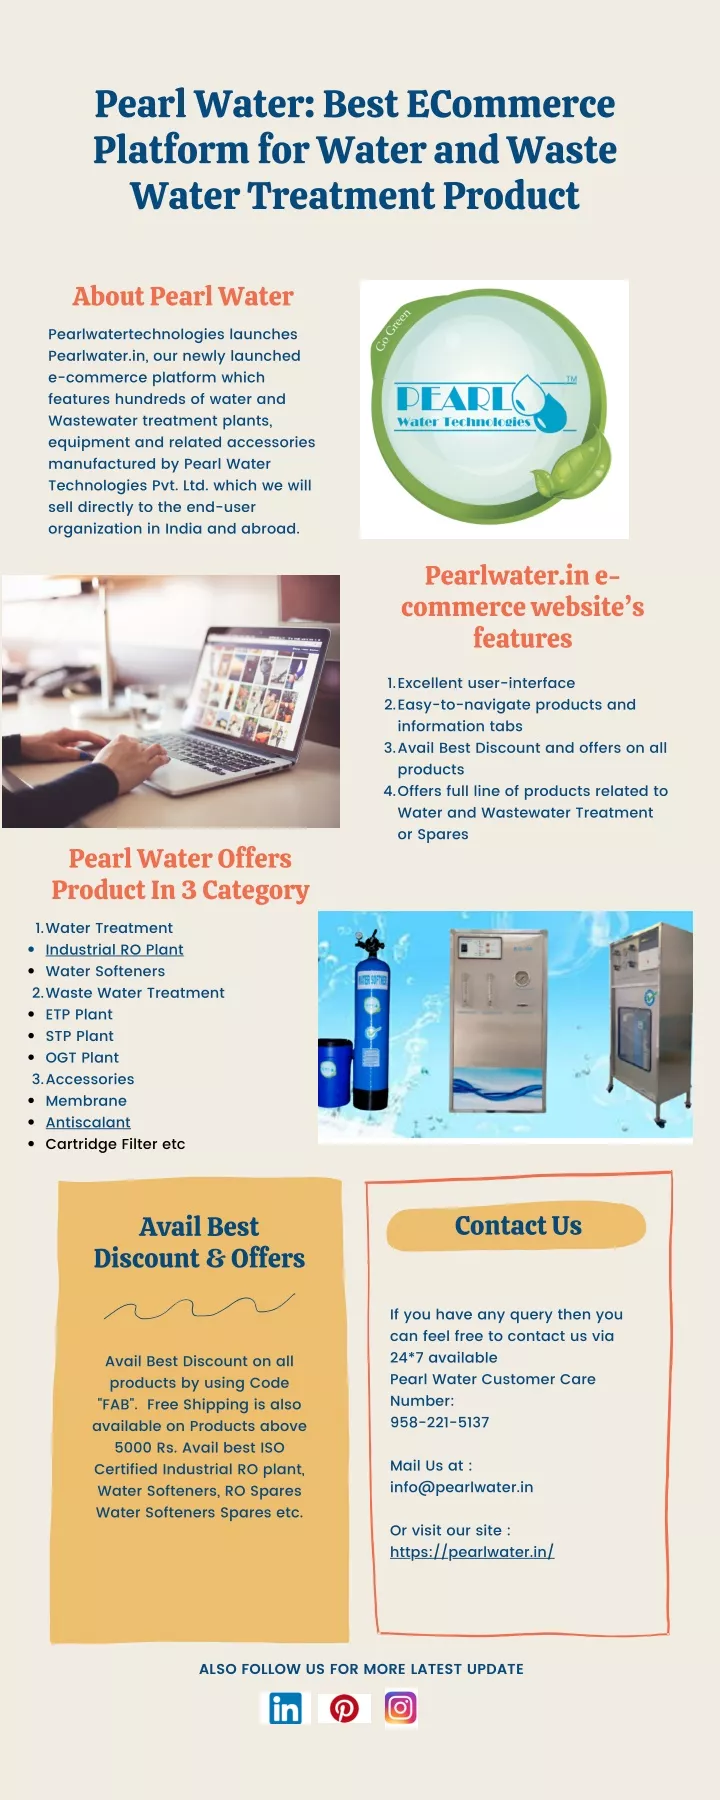 pearl water best ecommerce platform for water